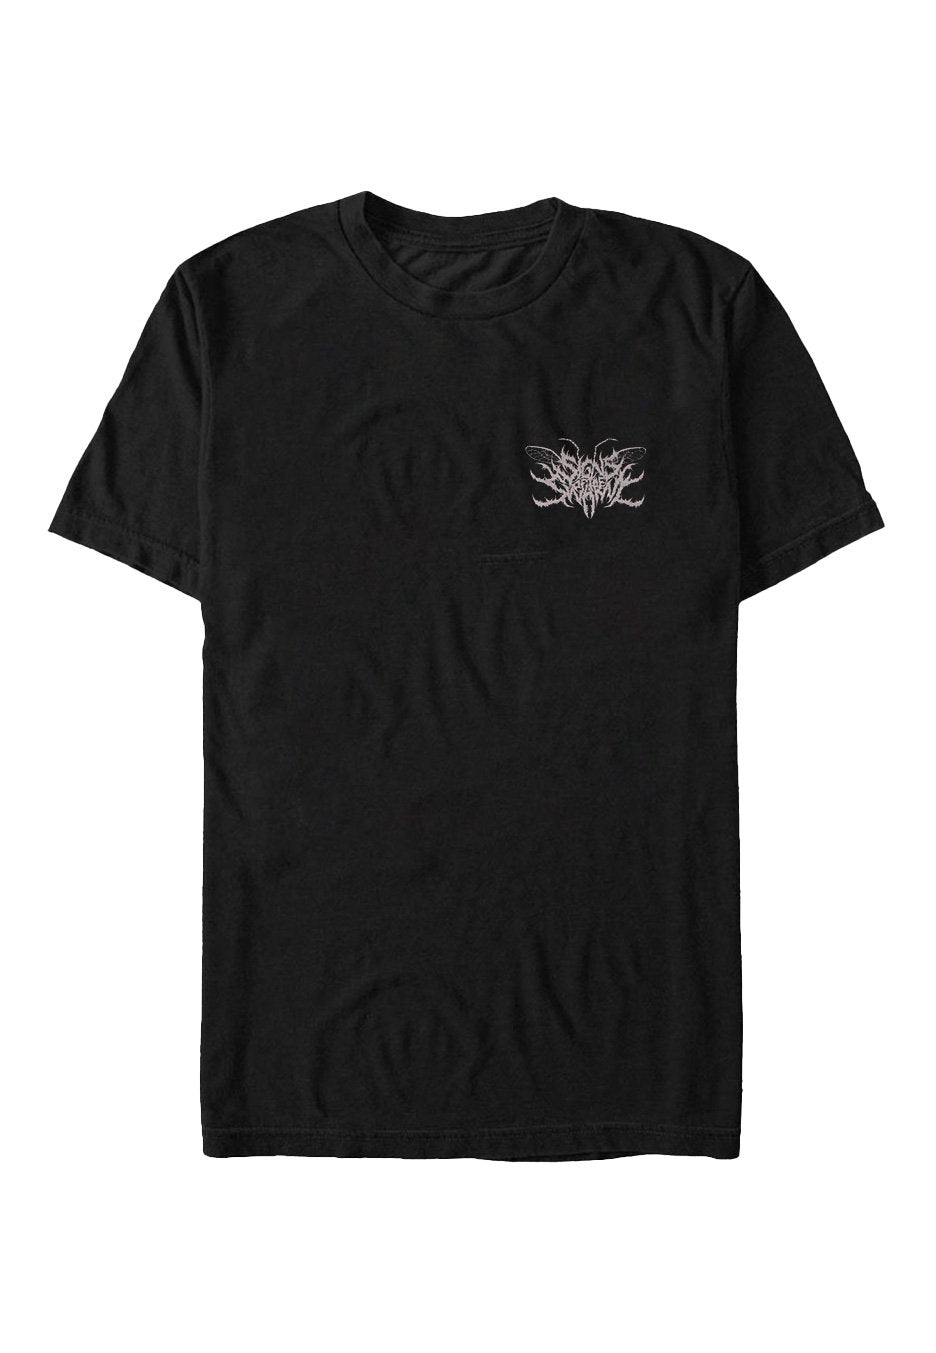 Signs Of The Swarm - Crest - T-Shirt